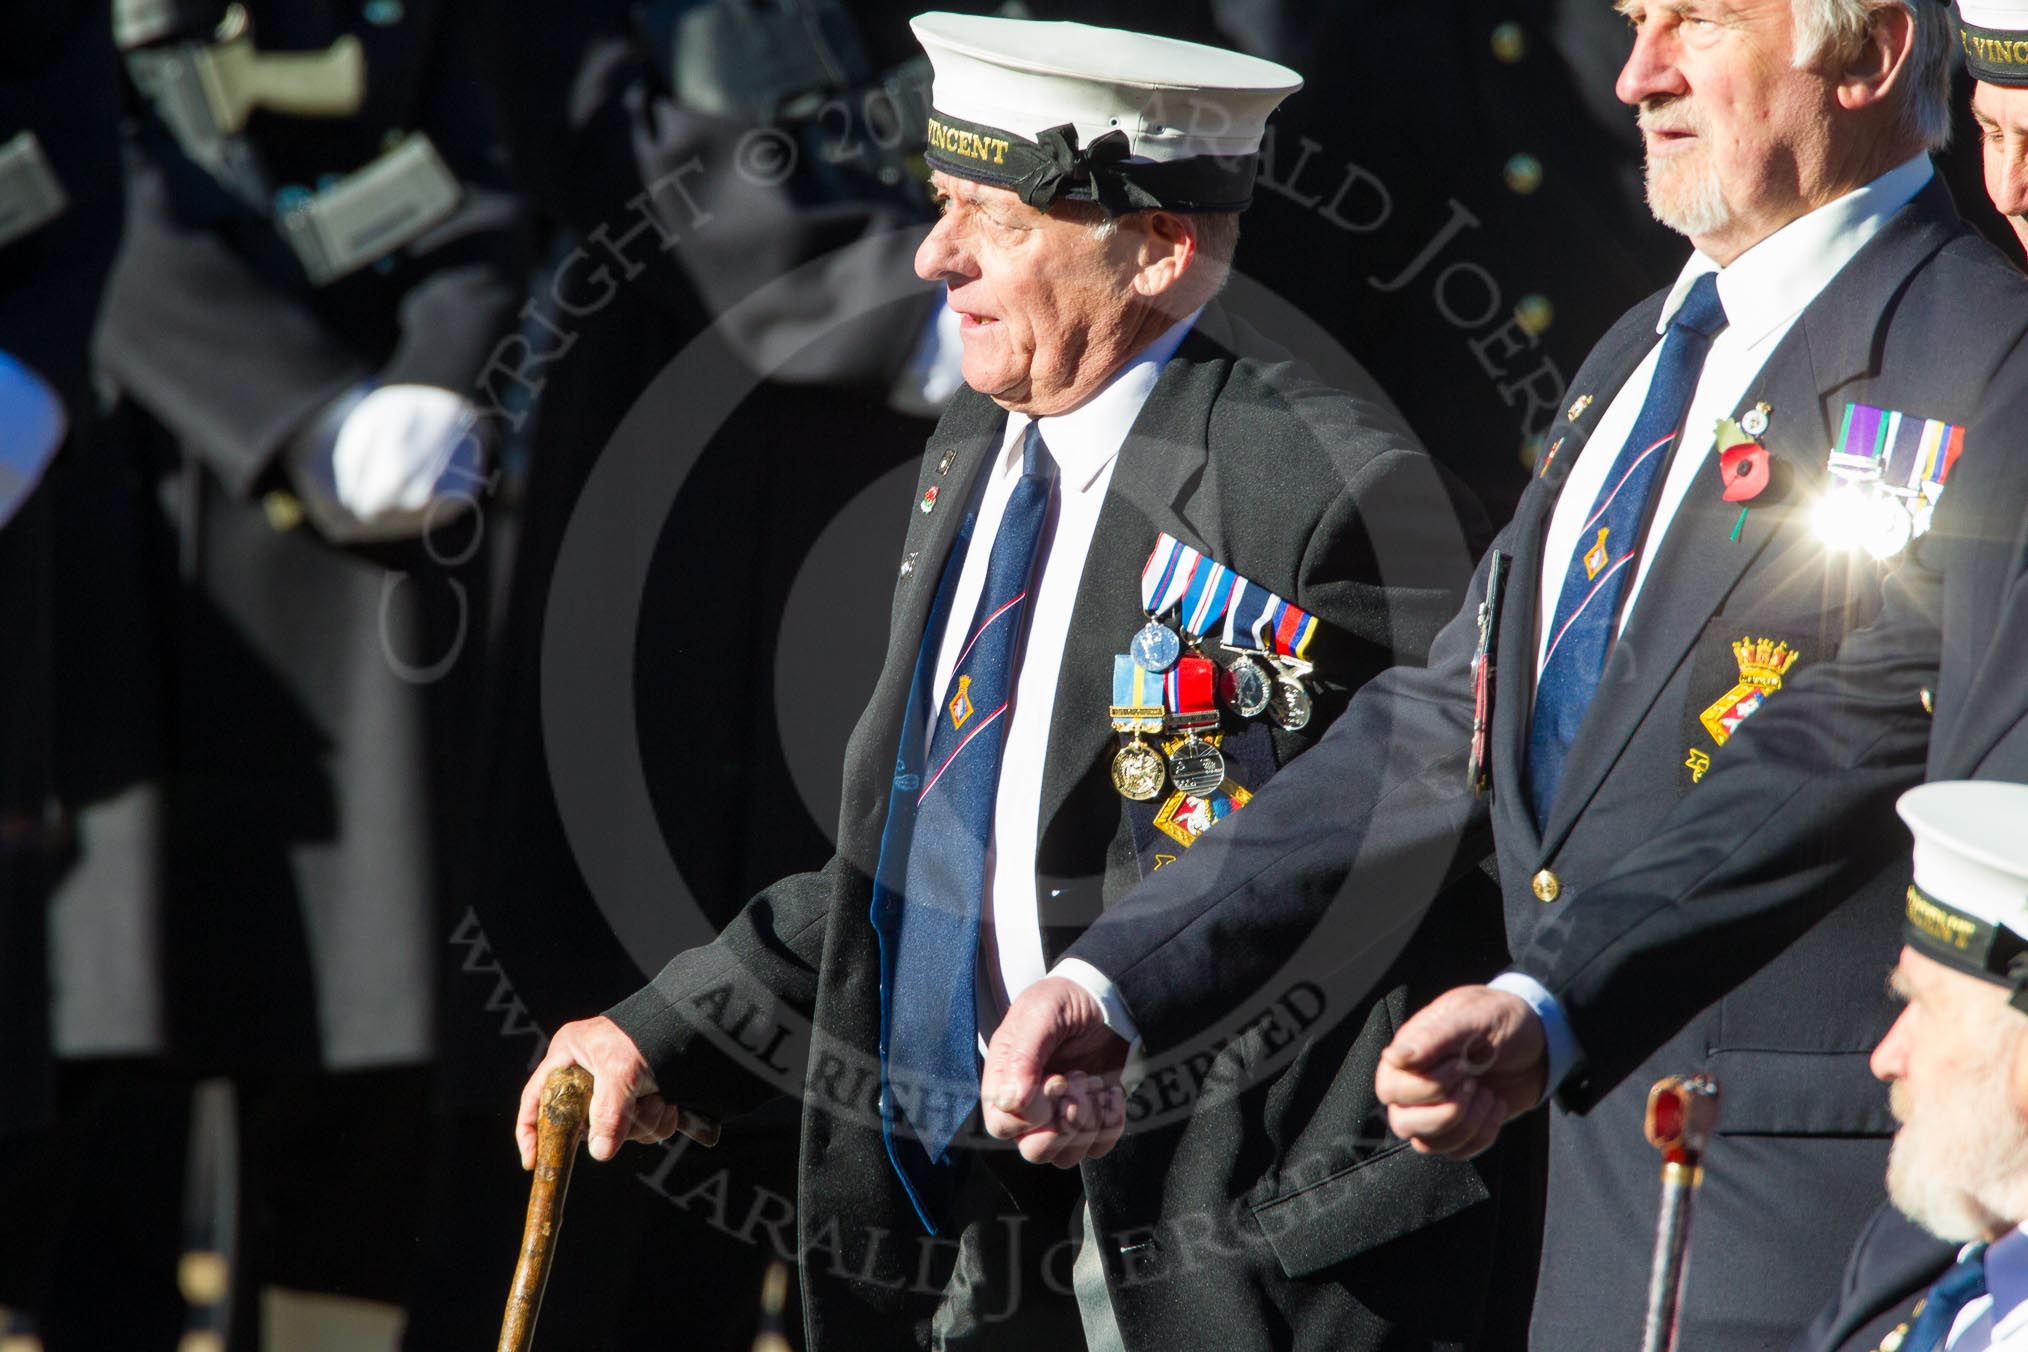 Remembrance Sunday Cenotaph March Past 2013: E23 - HMS St Vincent Association..
Press stand opposite the Foreign Office building, Whitehall, London SW1,
London,
Greater London,
United Kingdom,
on 10 November 2013 at 11:47, image #522